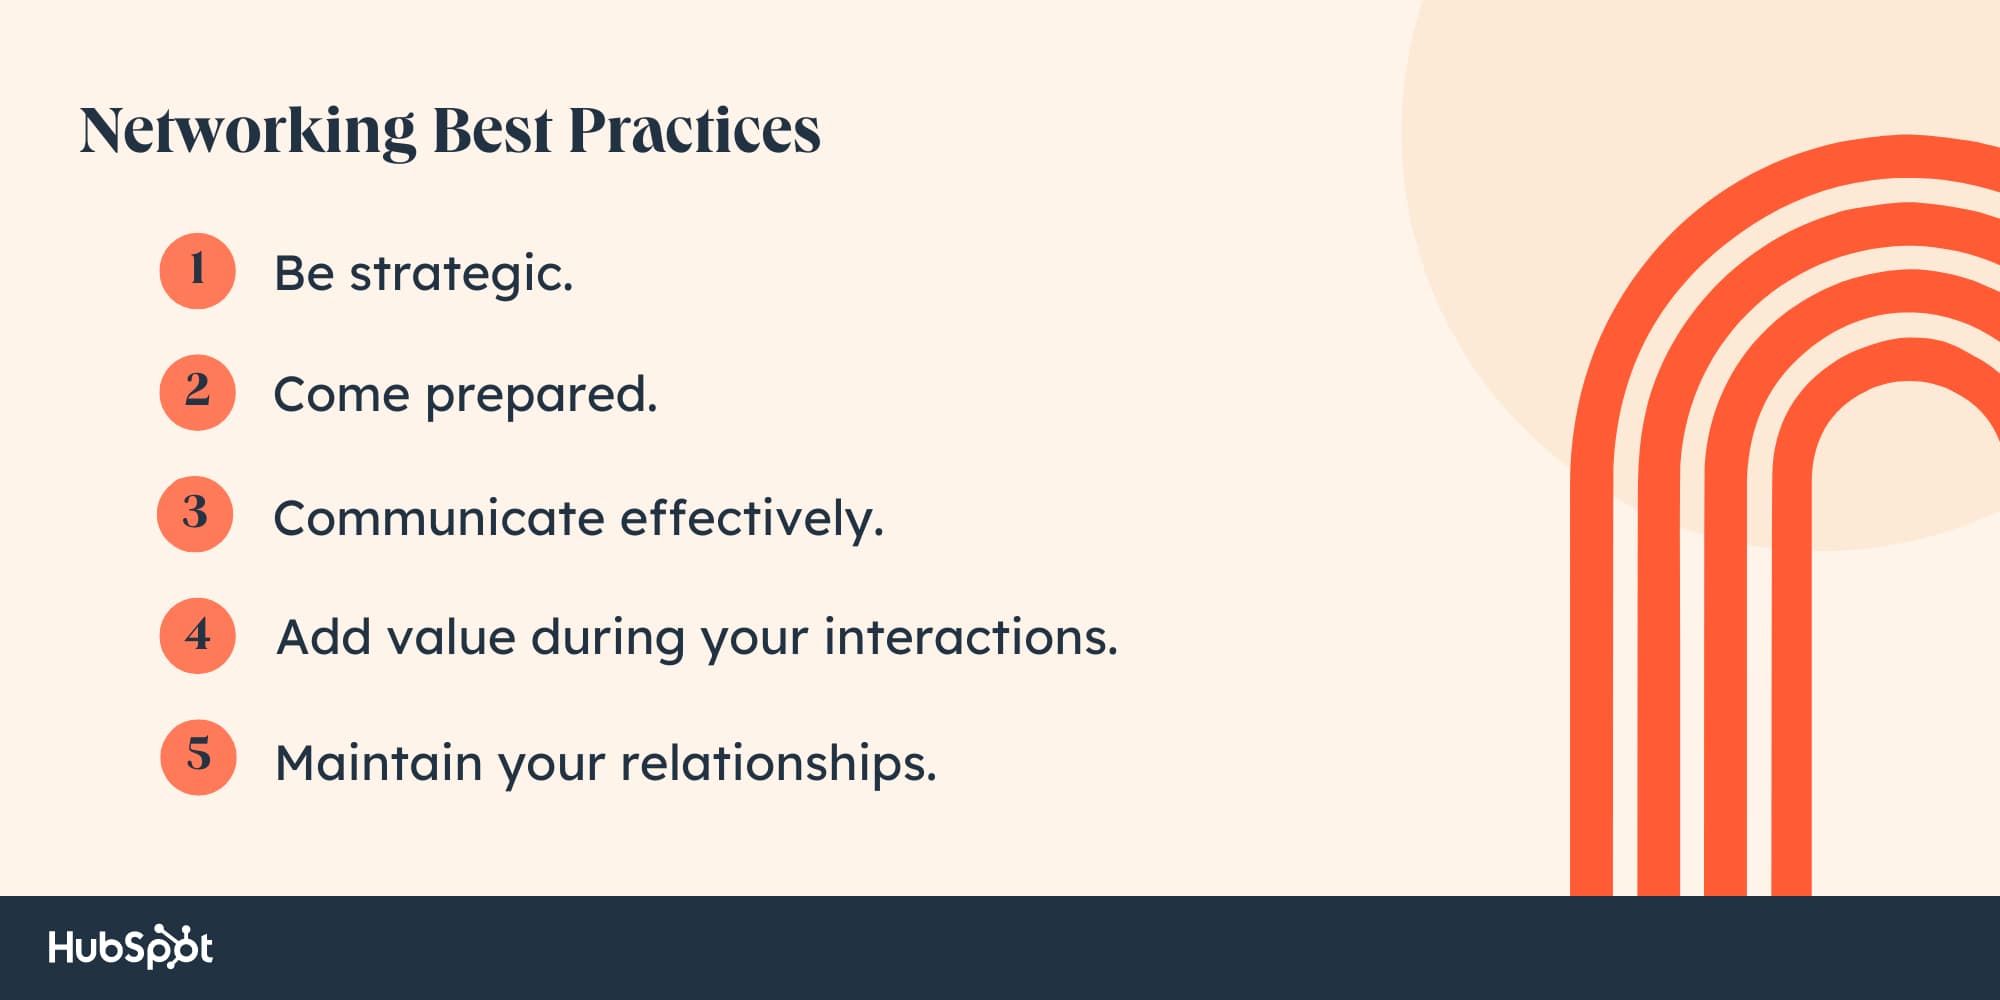 Networking Best Practices: Be strategic. Come prepared. Communicate effectively. Add value during your interactions. Maintain your relationships.